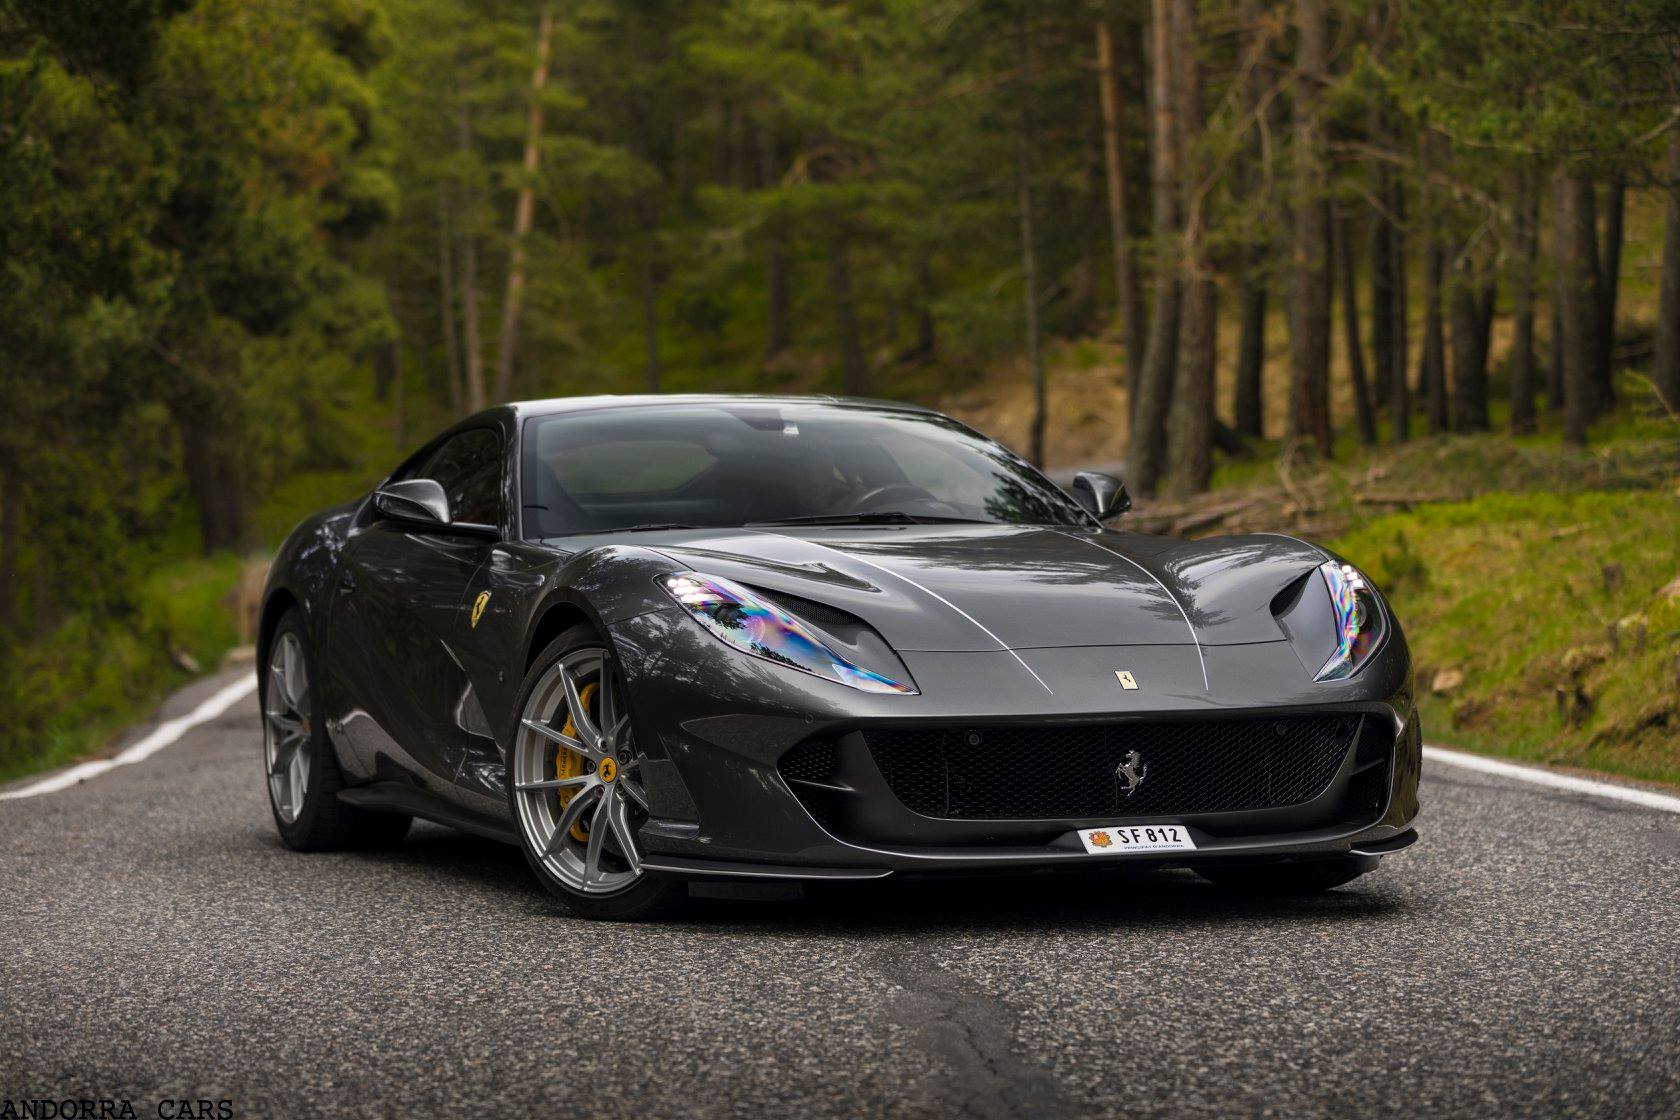 Ferrari 812 Superfast black color with 789 HP * All PYRENEES · France